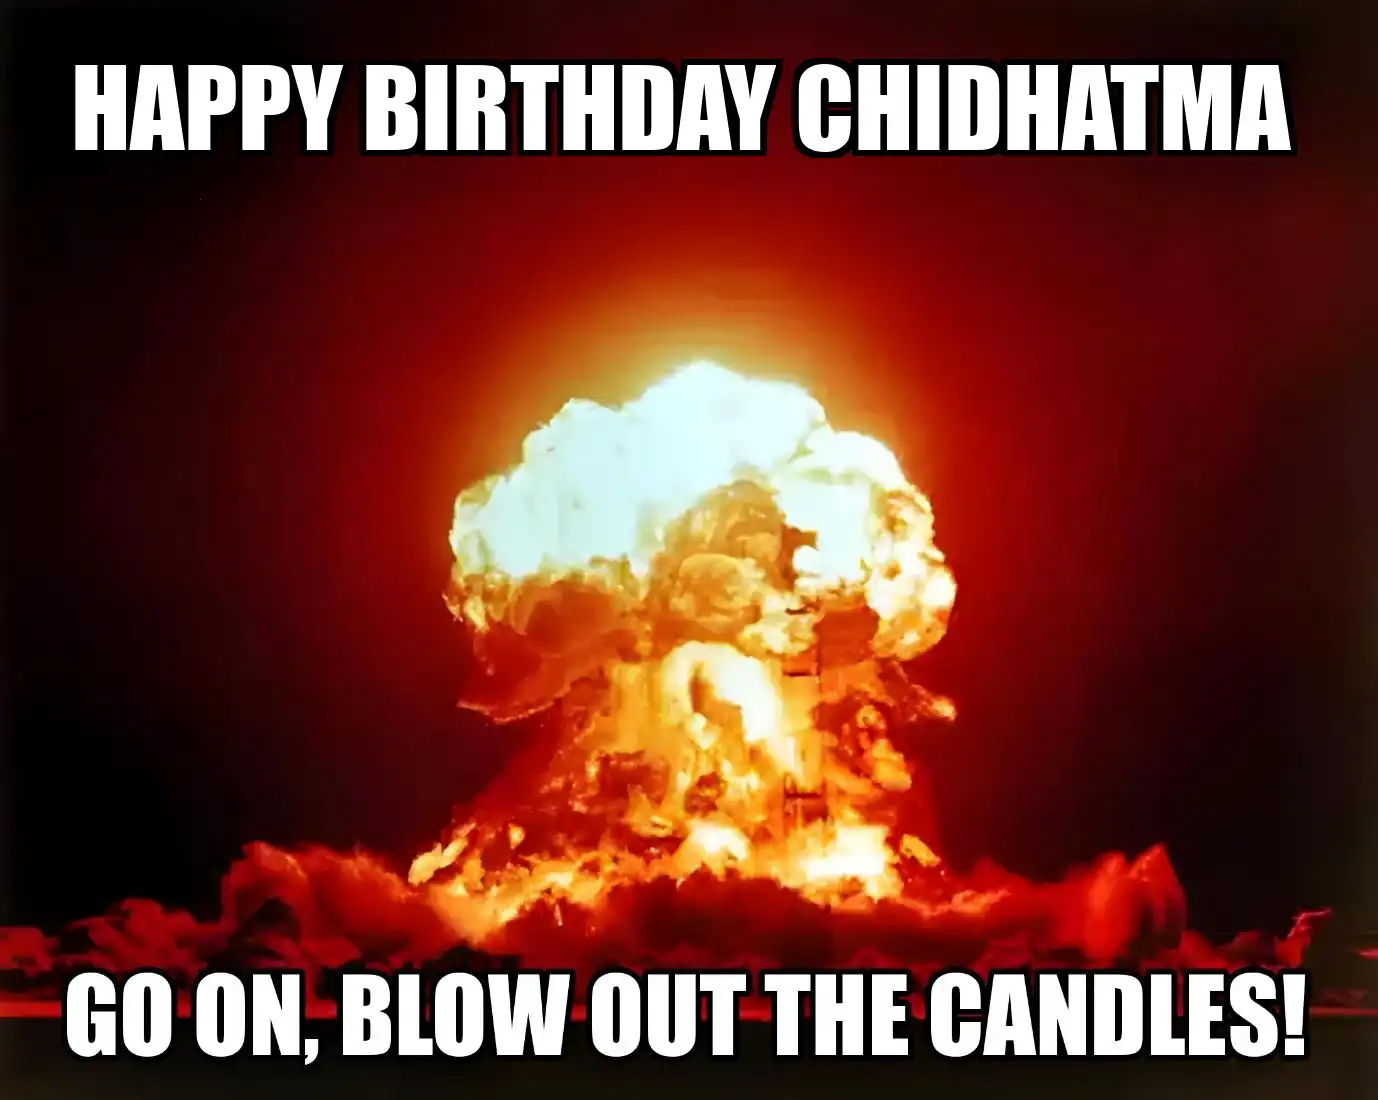 Happy Birthday Chidhatma Go On Blow Out The Candles Meme